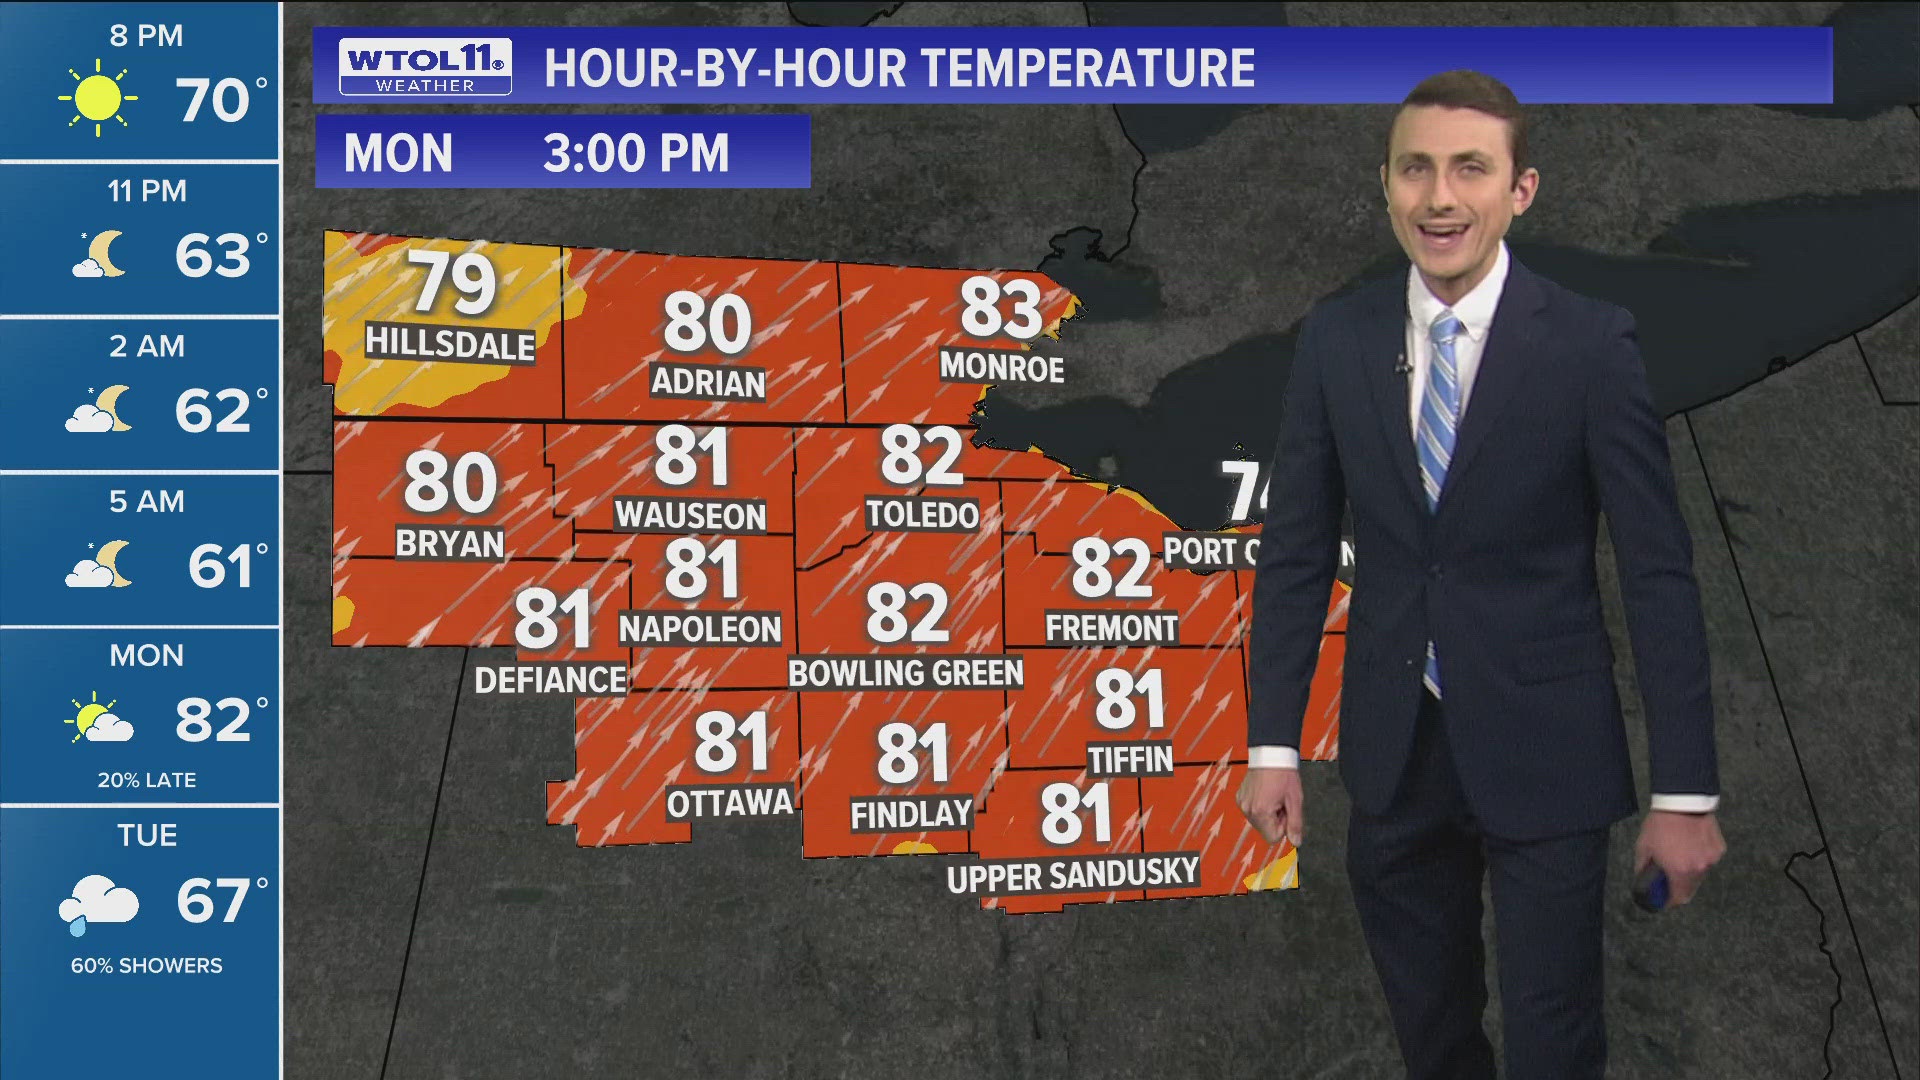 Temperatures will eventually reach 80 degrees by the afternoon Monday.